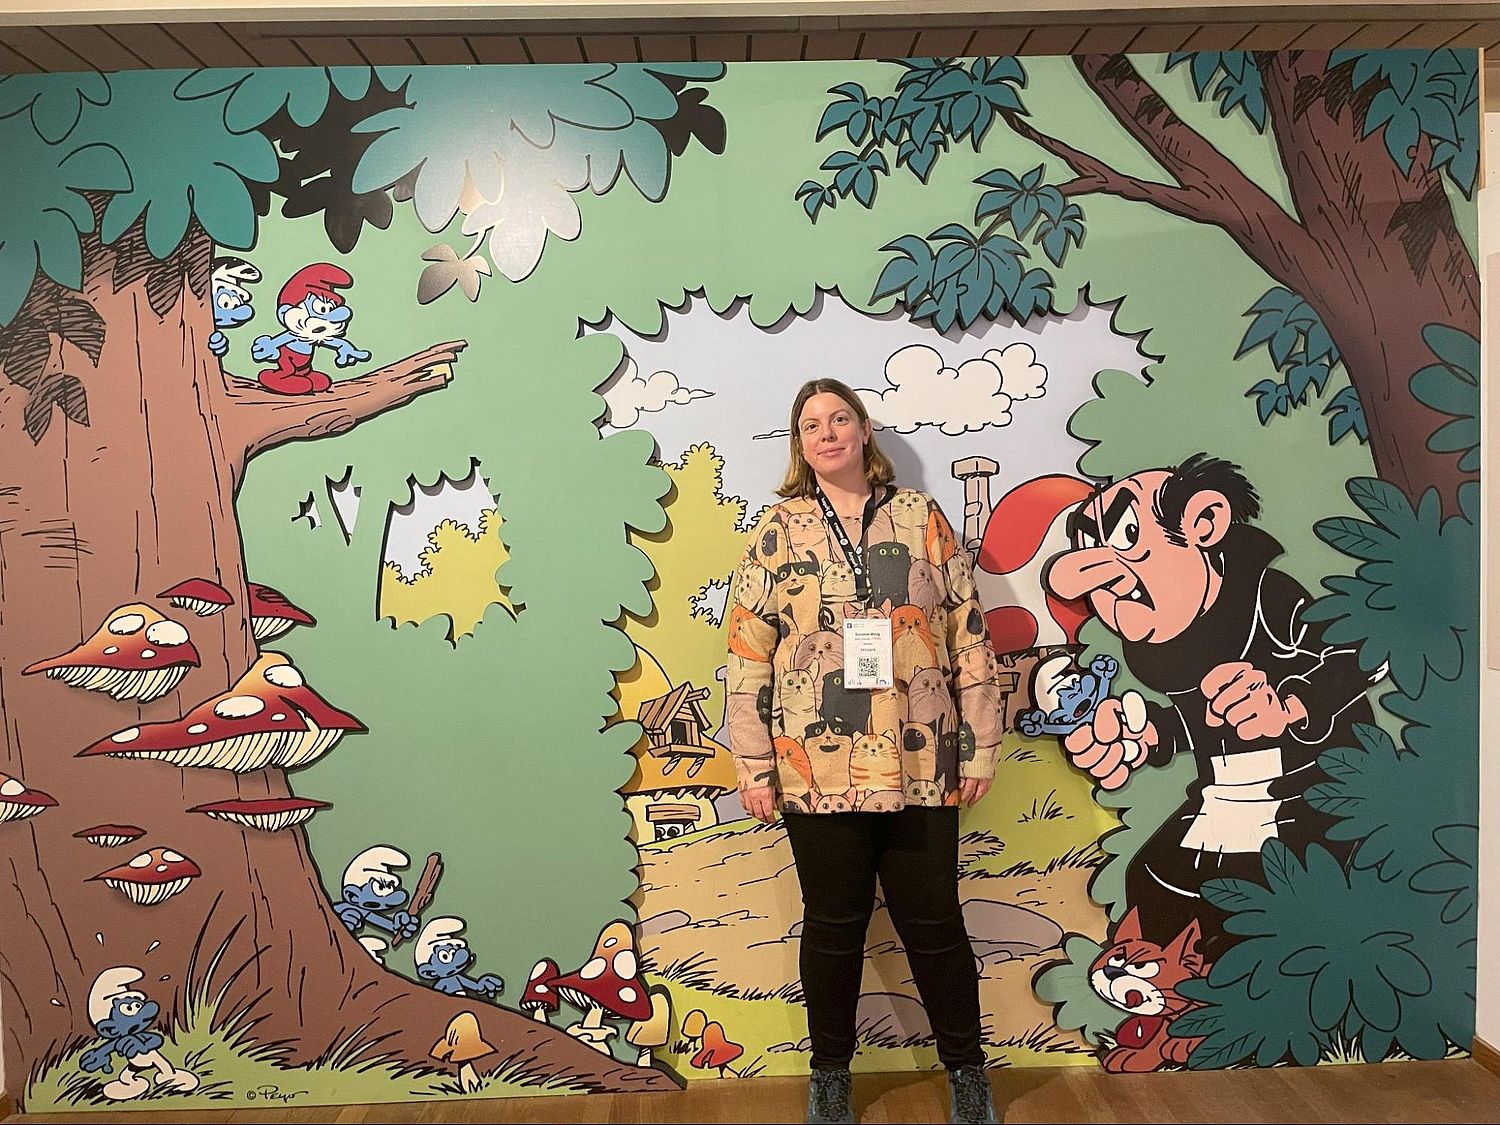 Woman in yellow shirt standing in front of a wall with a Smurf cartoon forest environment with trees and mushrooms.